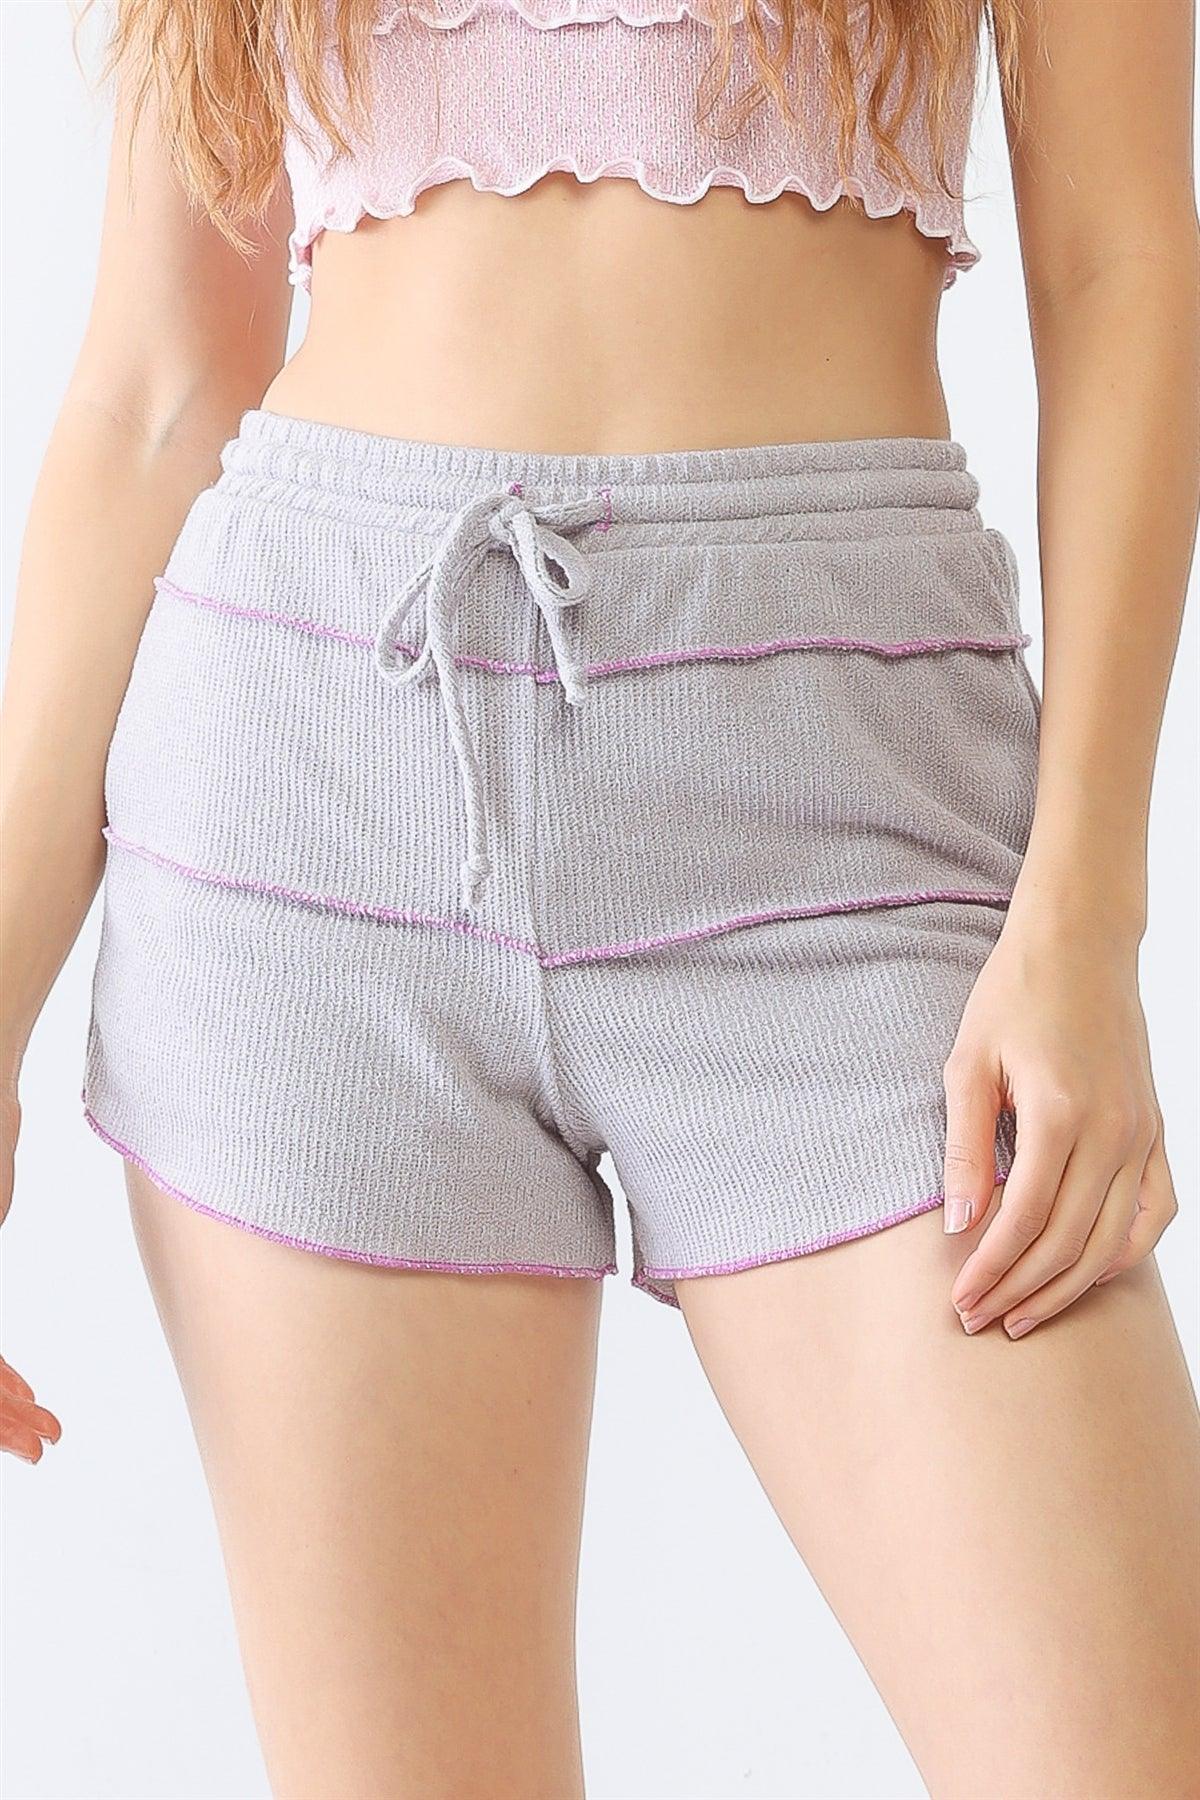 Lavender Knit Inside-Out High Waist Shorts /1-2-2-1